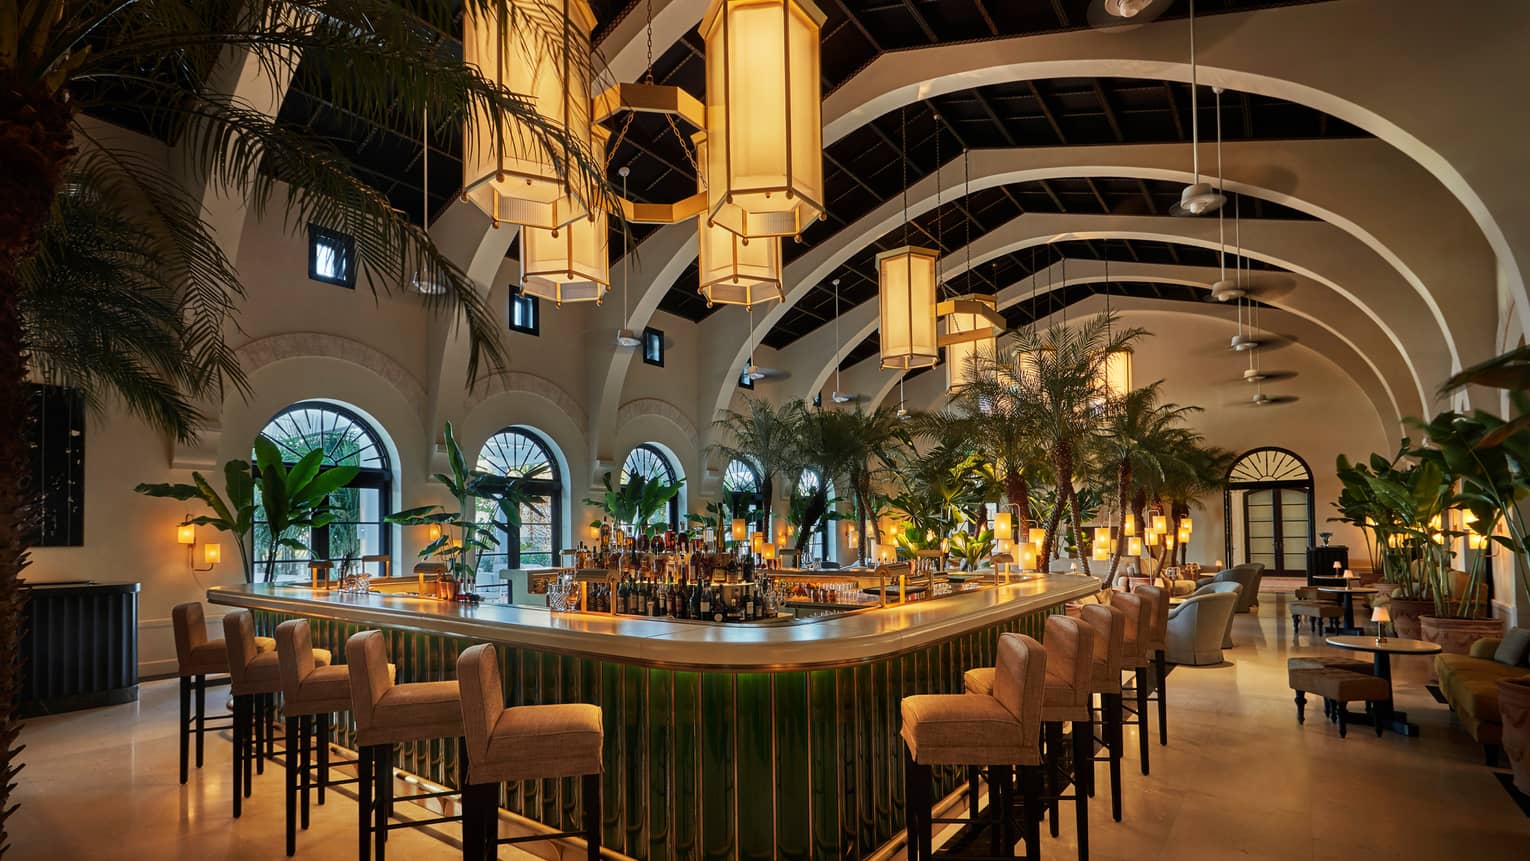 Evening view of Le Sirenuse indoor Champagne bar, stools and palms lining white bar